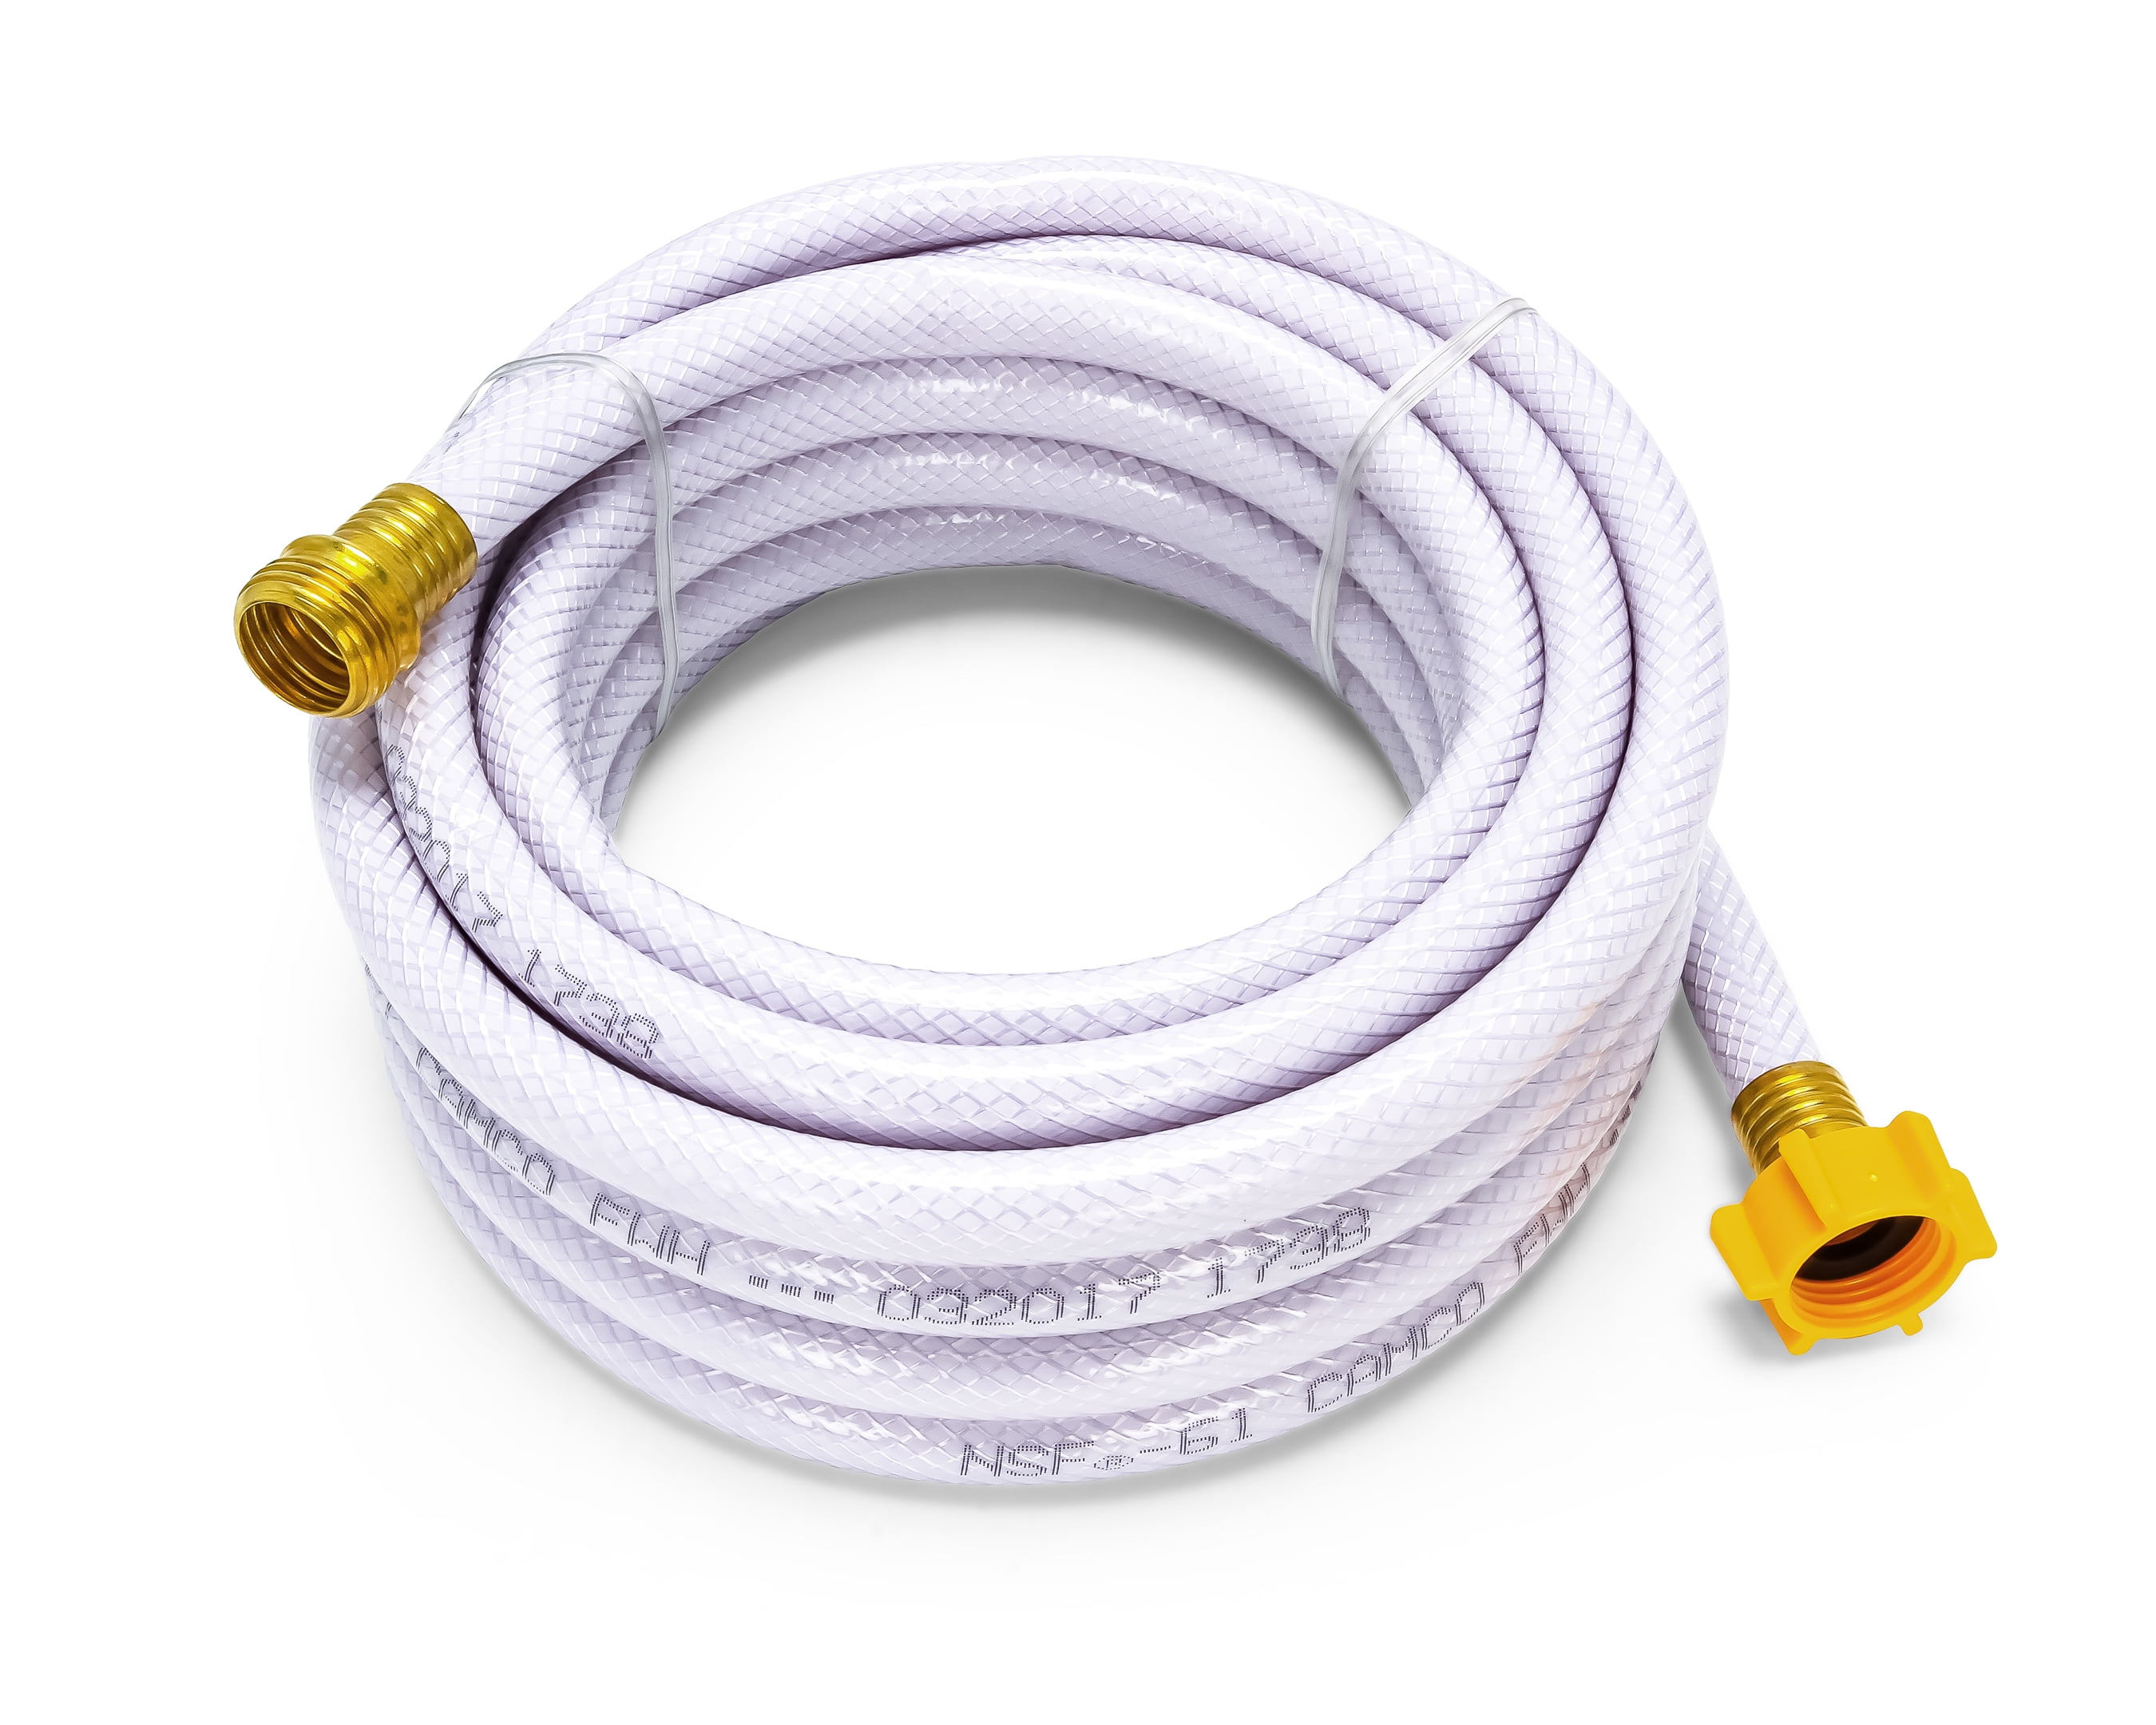 Camco 25Ft 50Ft Reinforced Drinking Water Hose Lead & BPA Free Anti-Kink Design 